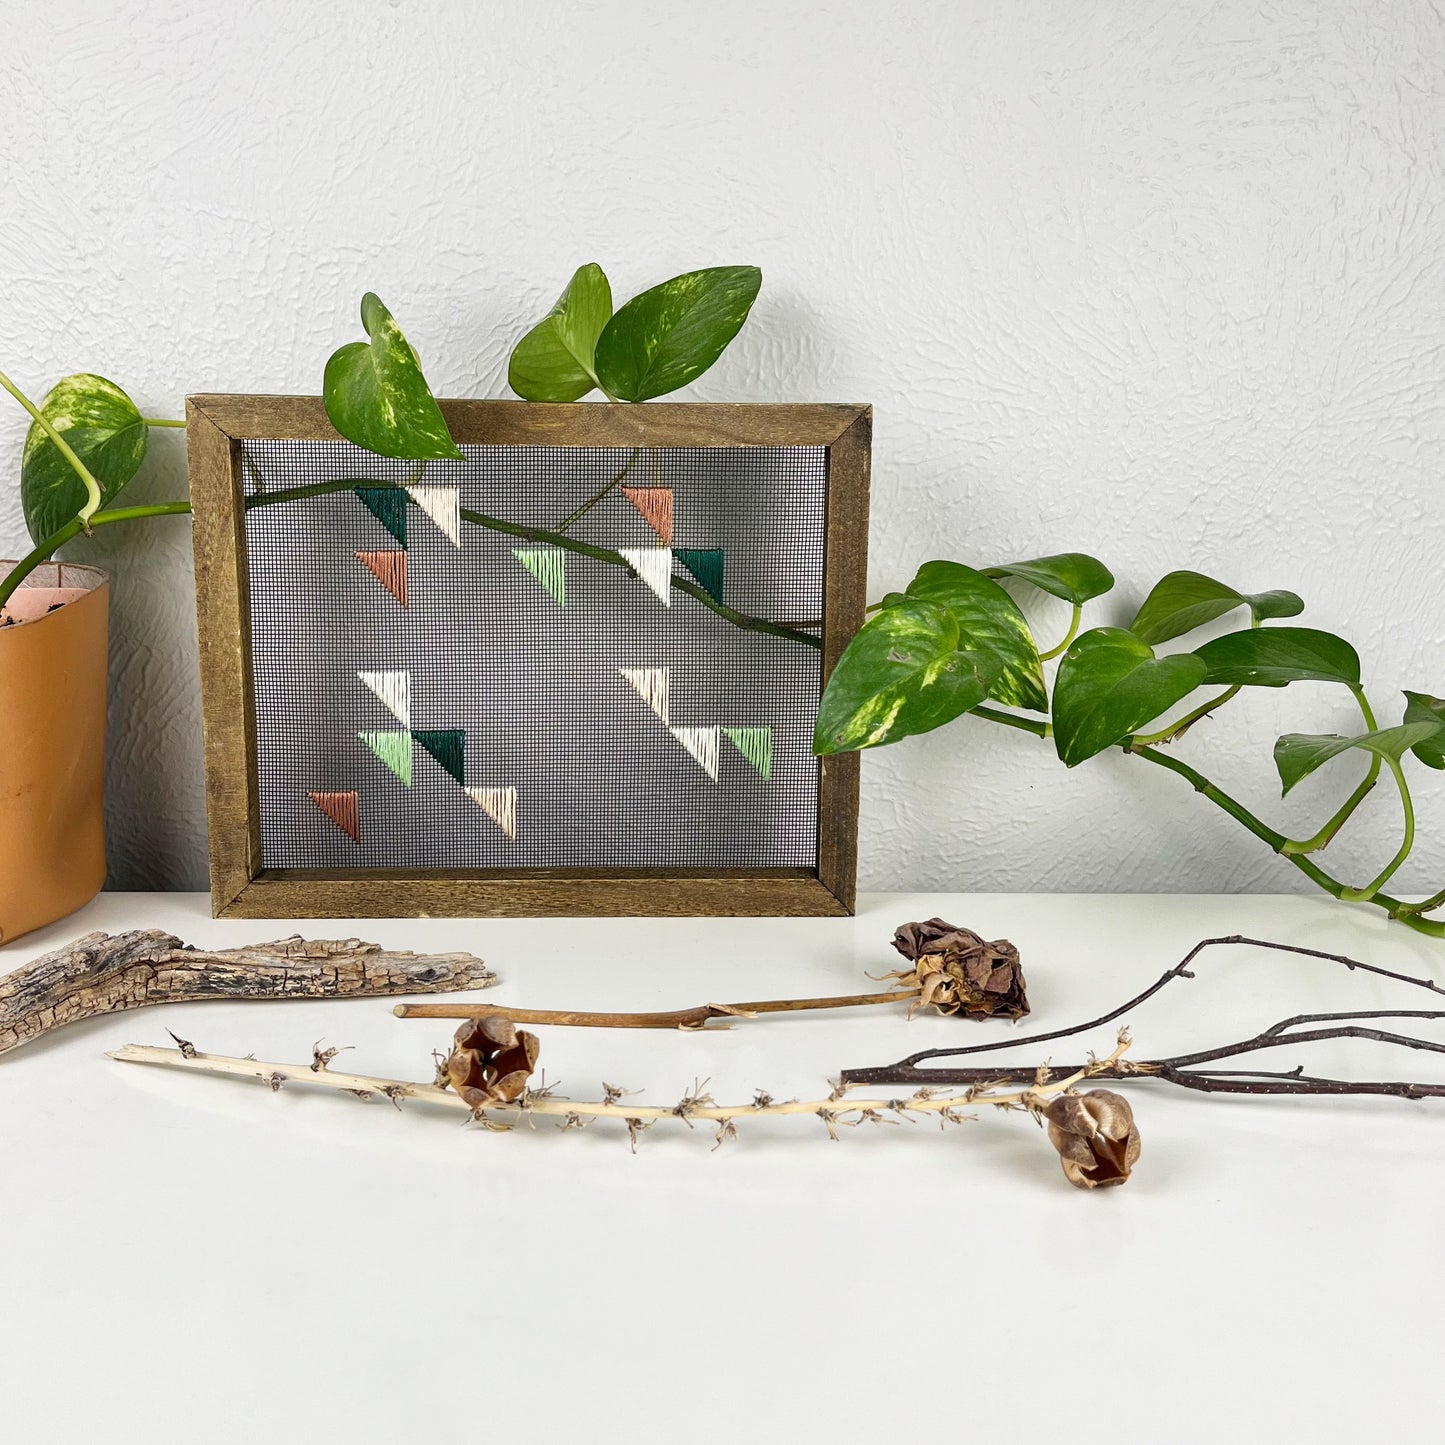 a piece of window screen hand stitched with green mauve peach and ivory triangles in an abstract design, in a wood frame, on a white counter, with a pothos behind it and sticks/dried flowers in front of it